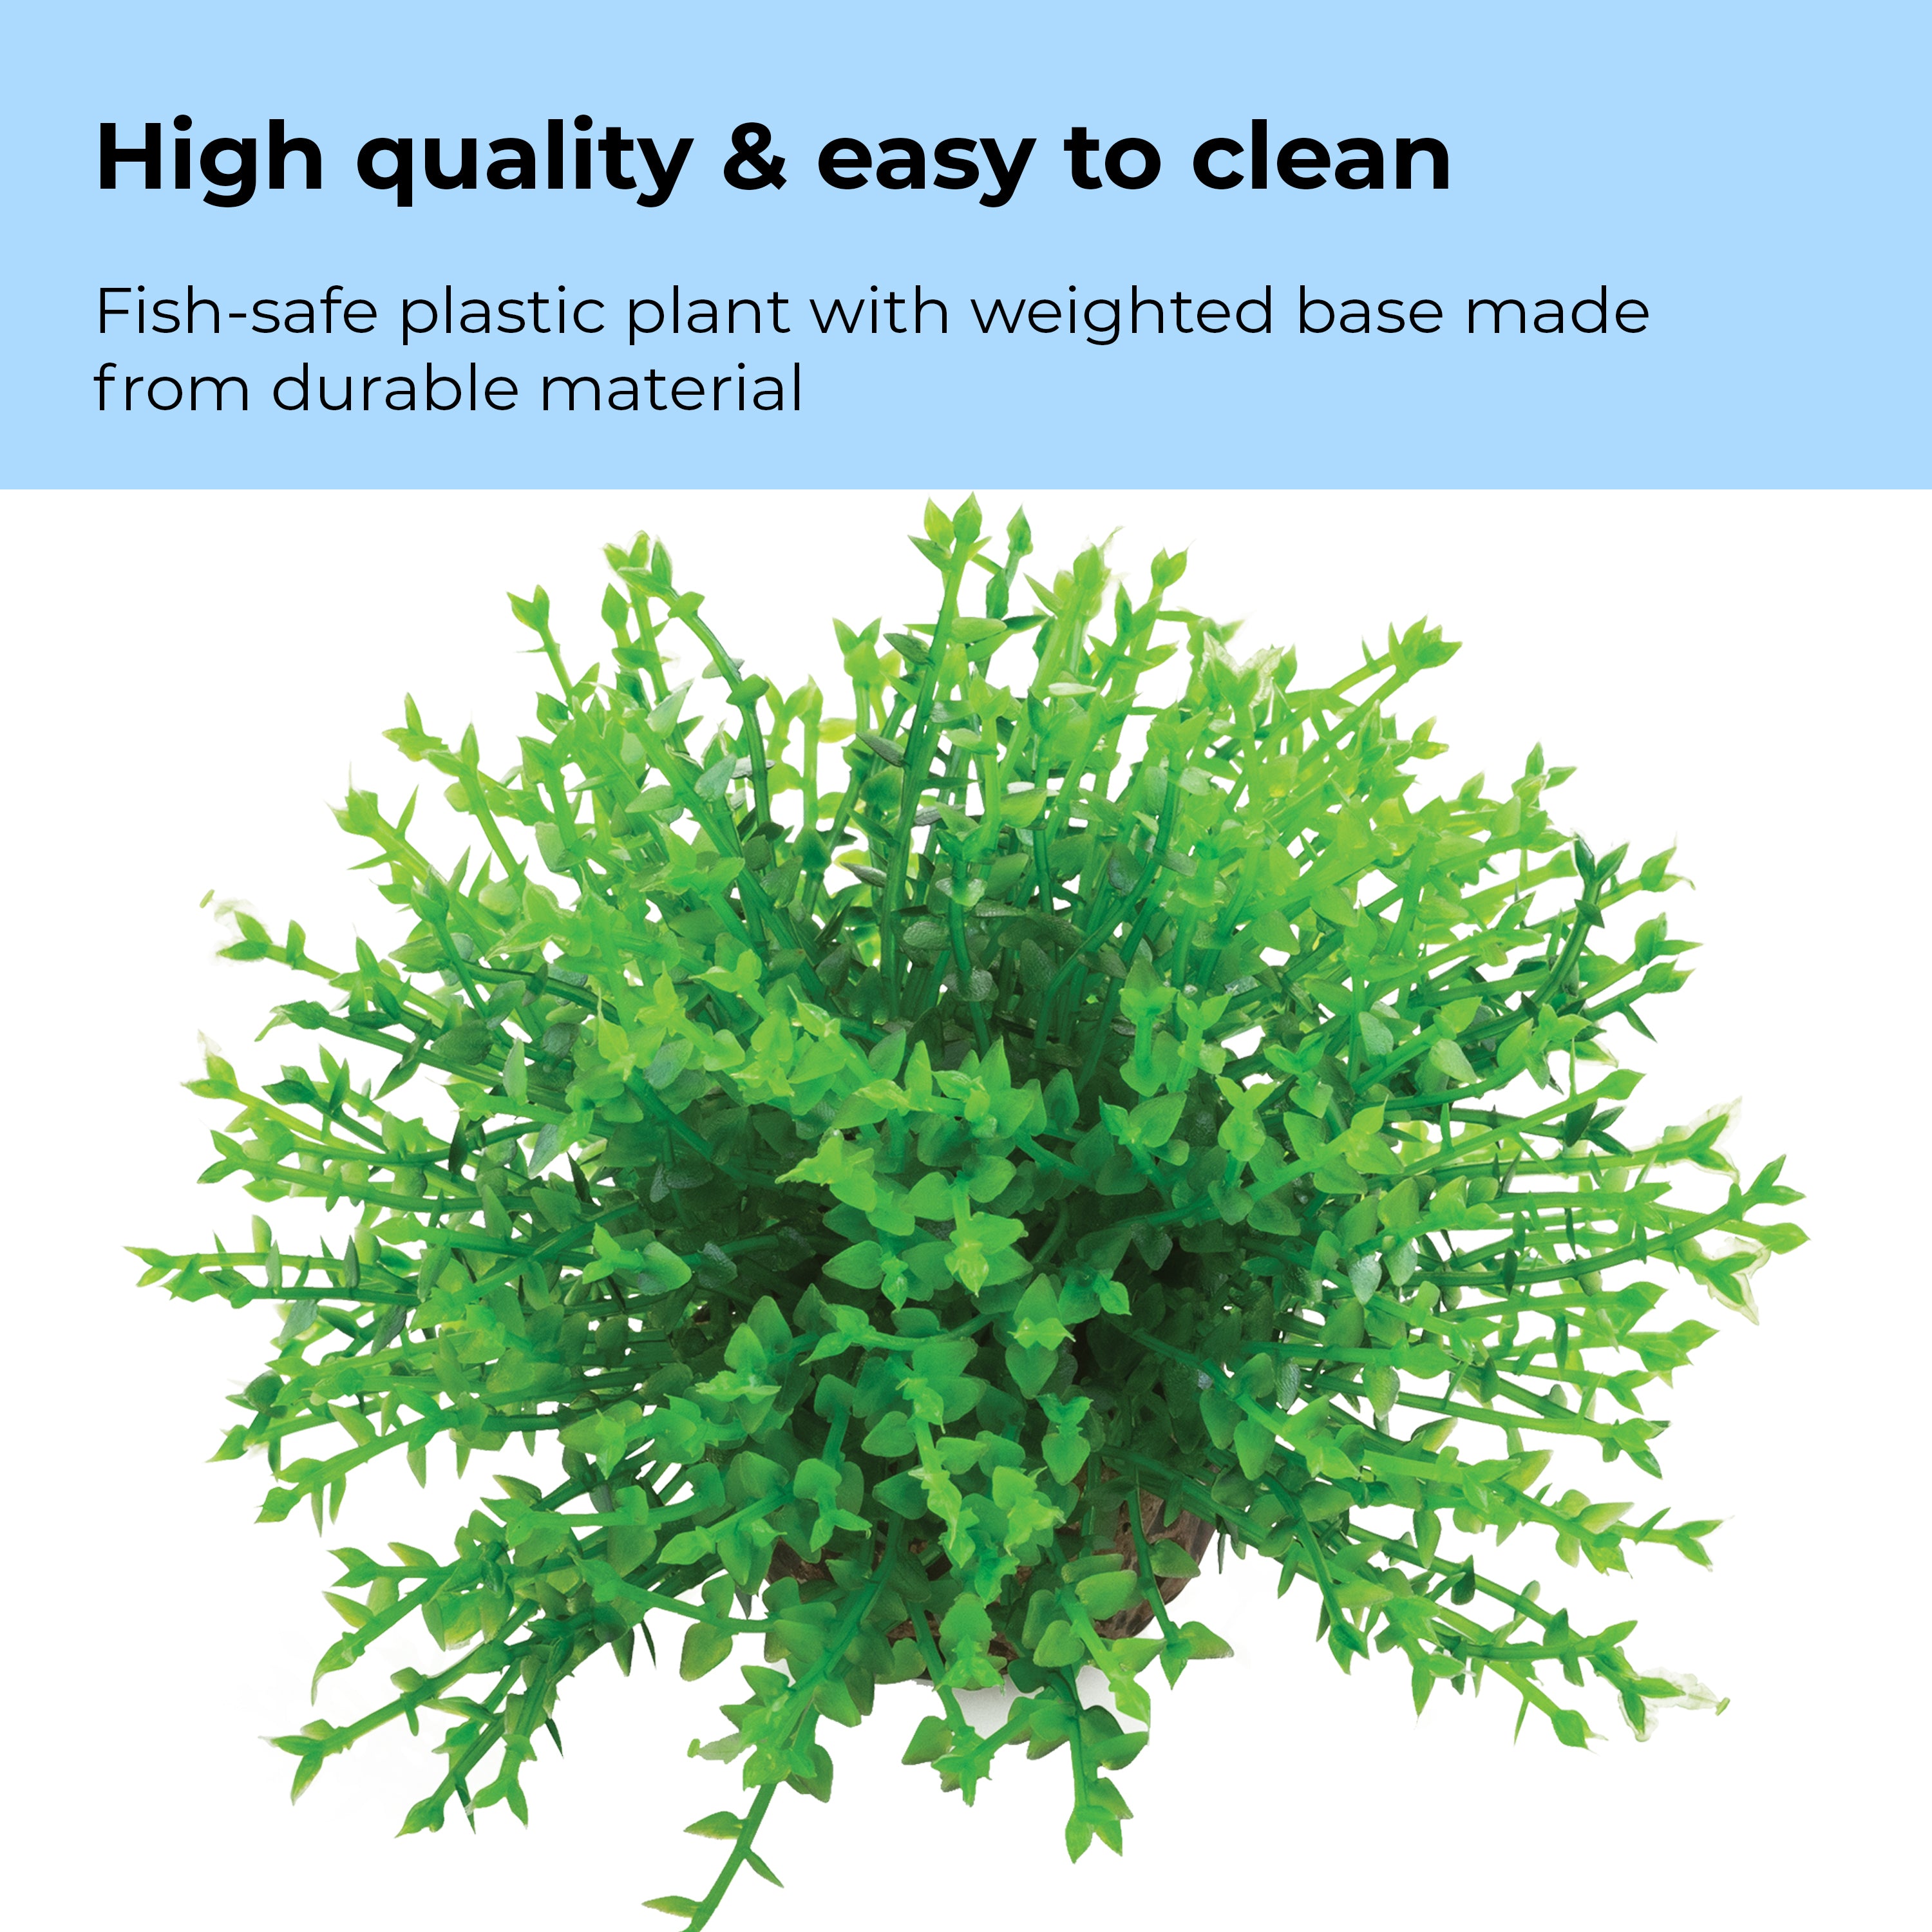 Green Flower Ball - High quality & easy to clean